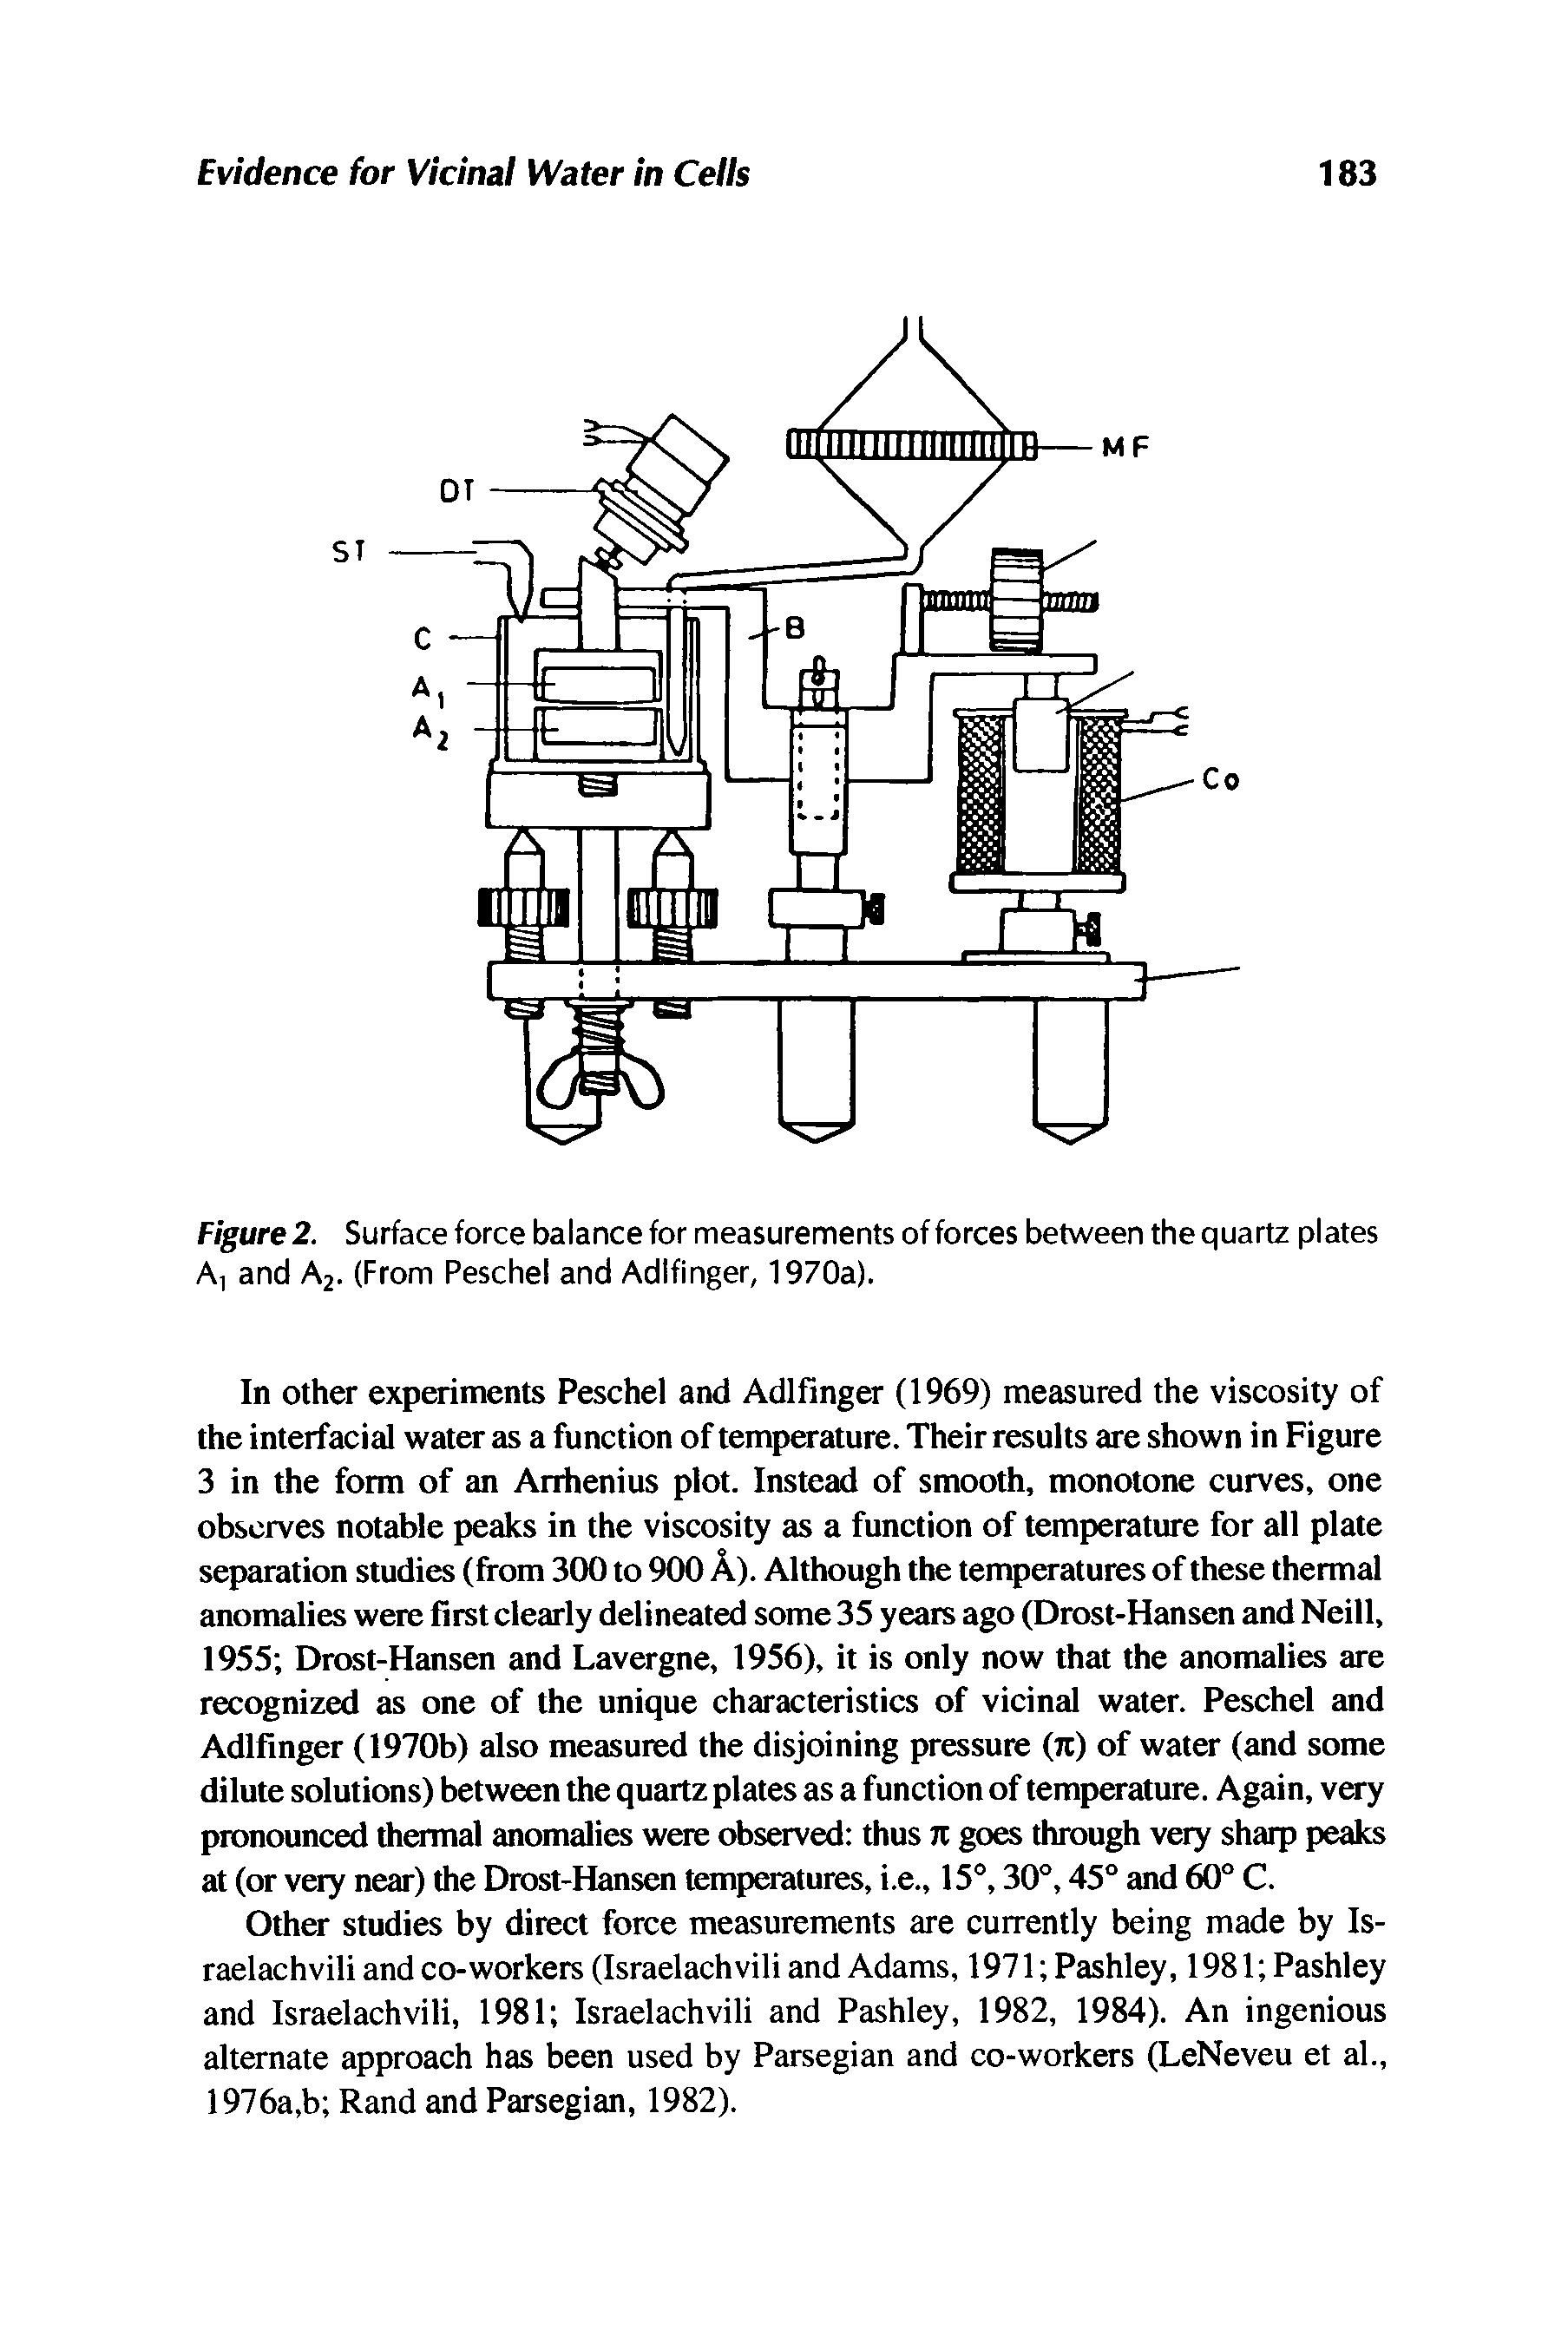 Figure 2. Surface force balance for measurements offerees between the quartz plates A, and A2. (From Peschel and Adifinger, 1970a).